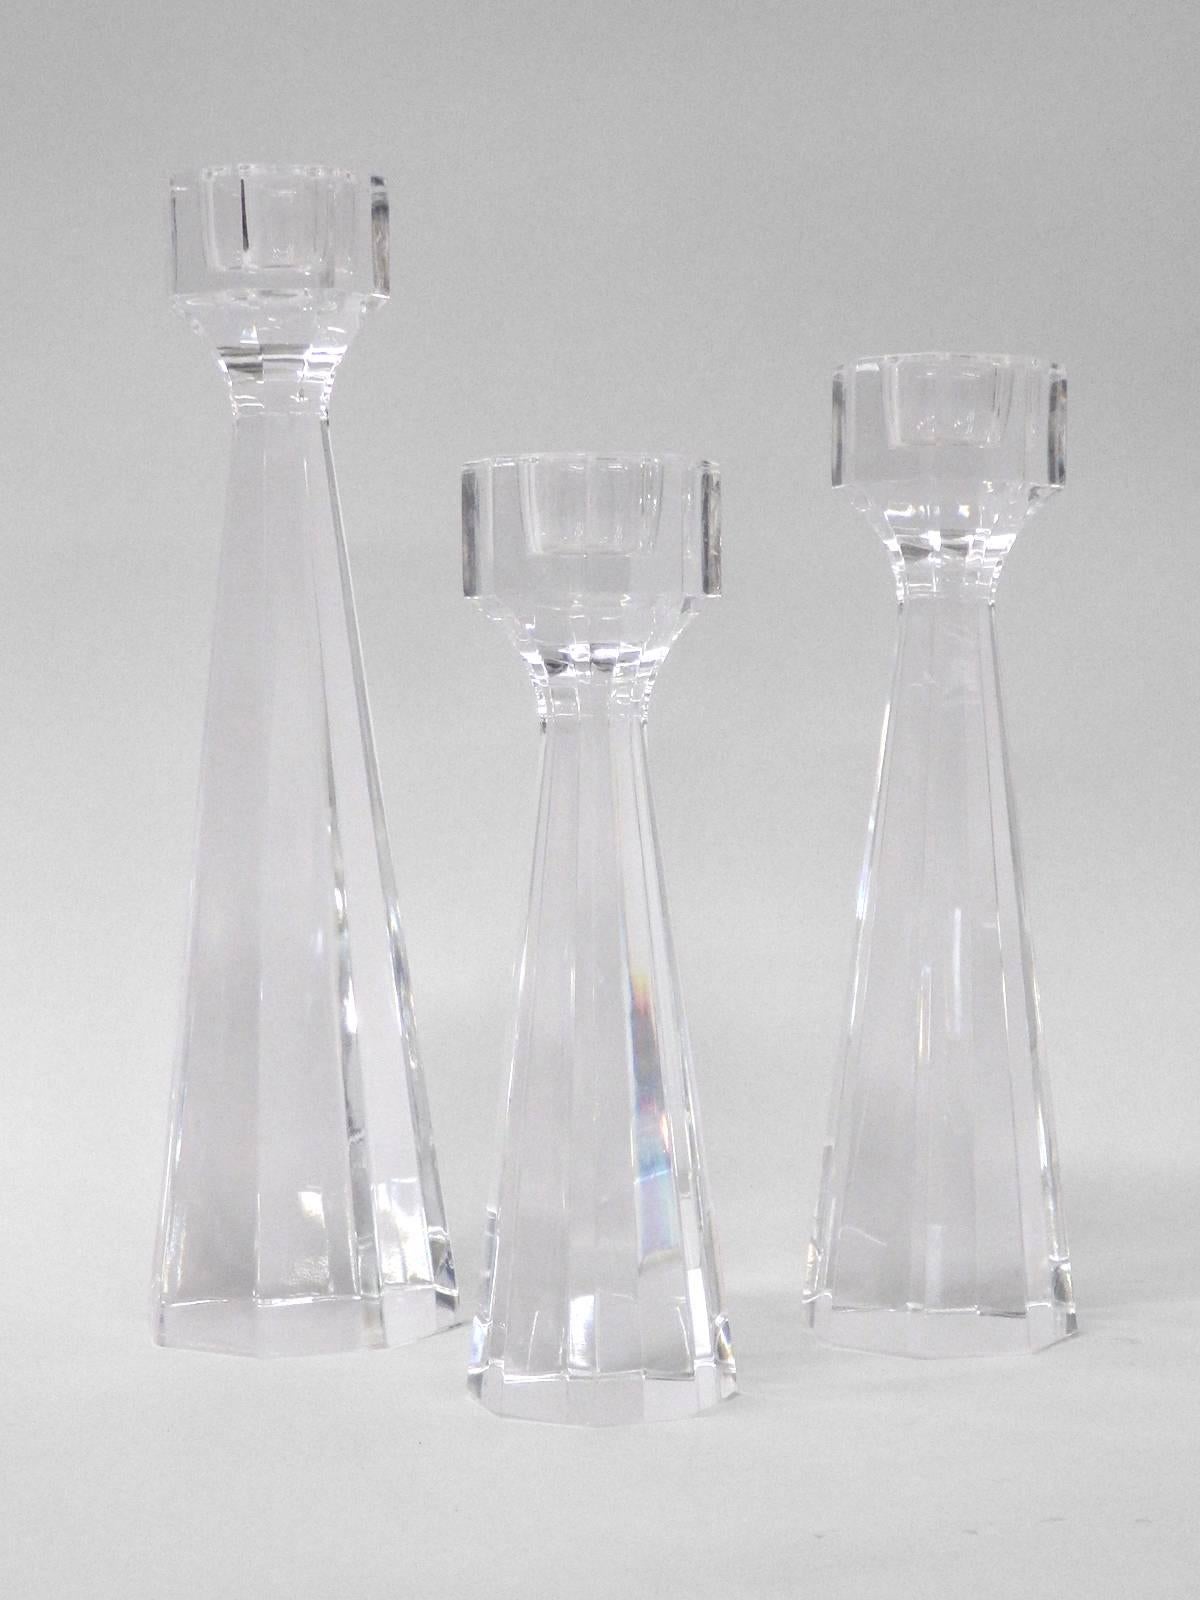 Set of three lead crystal candle sticks . Designed by Eden Falk for Kosta Boda.  Eight faceted sides form the octagon shape . Signed Kosta Eden Falk 
Tallest: 2.75” wide at base x 2.75” deep x 10” tall. Second 8.5 tall x 2.25 wide at base smaller